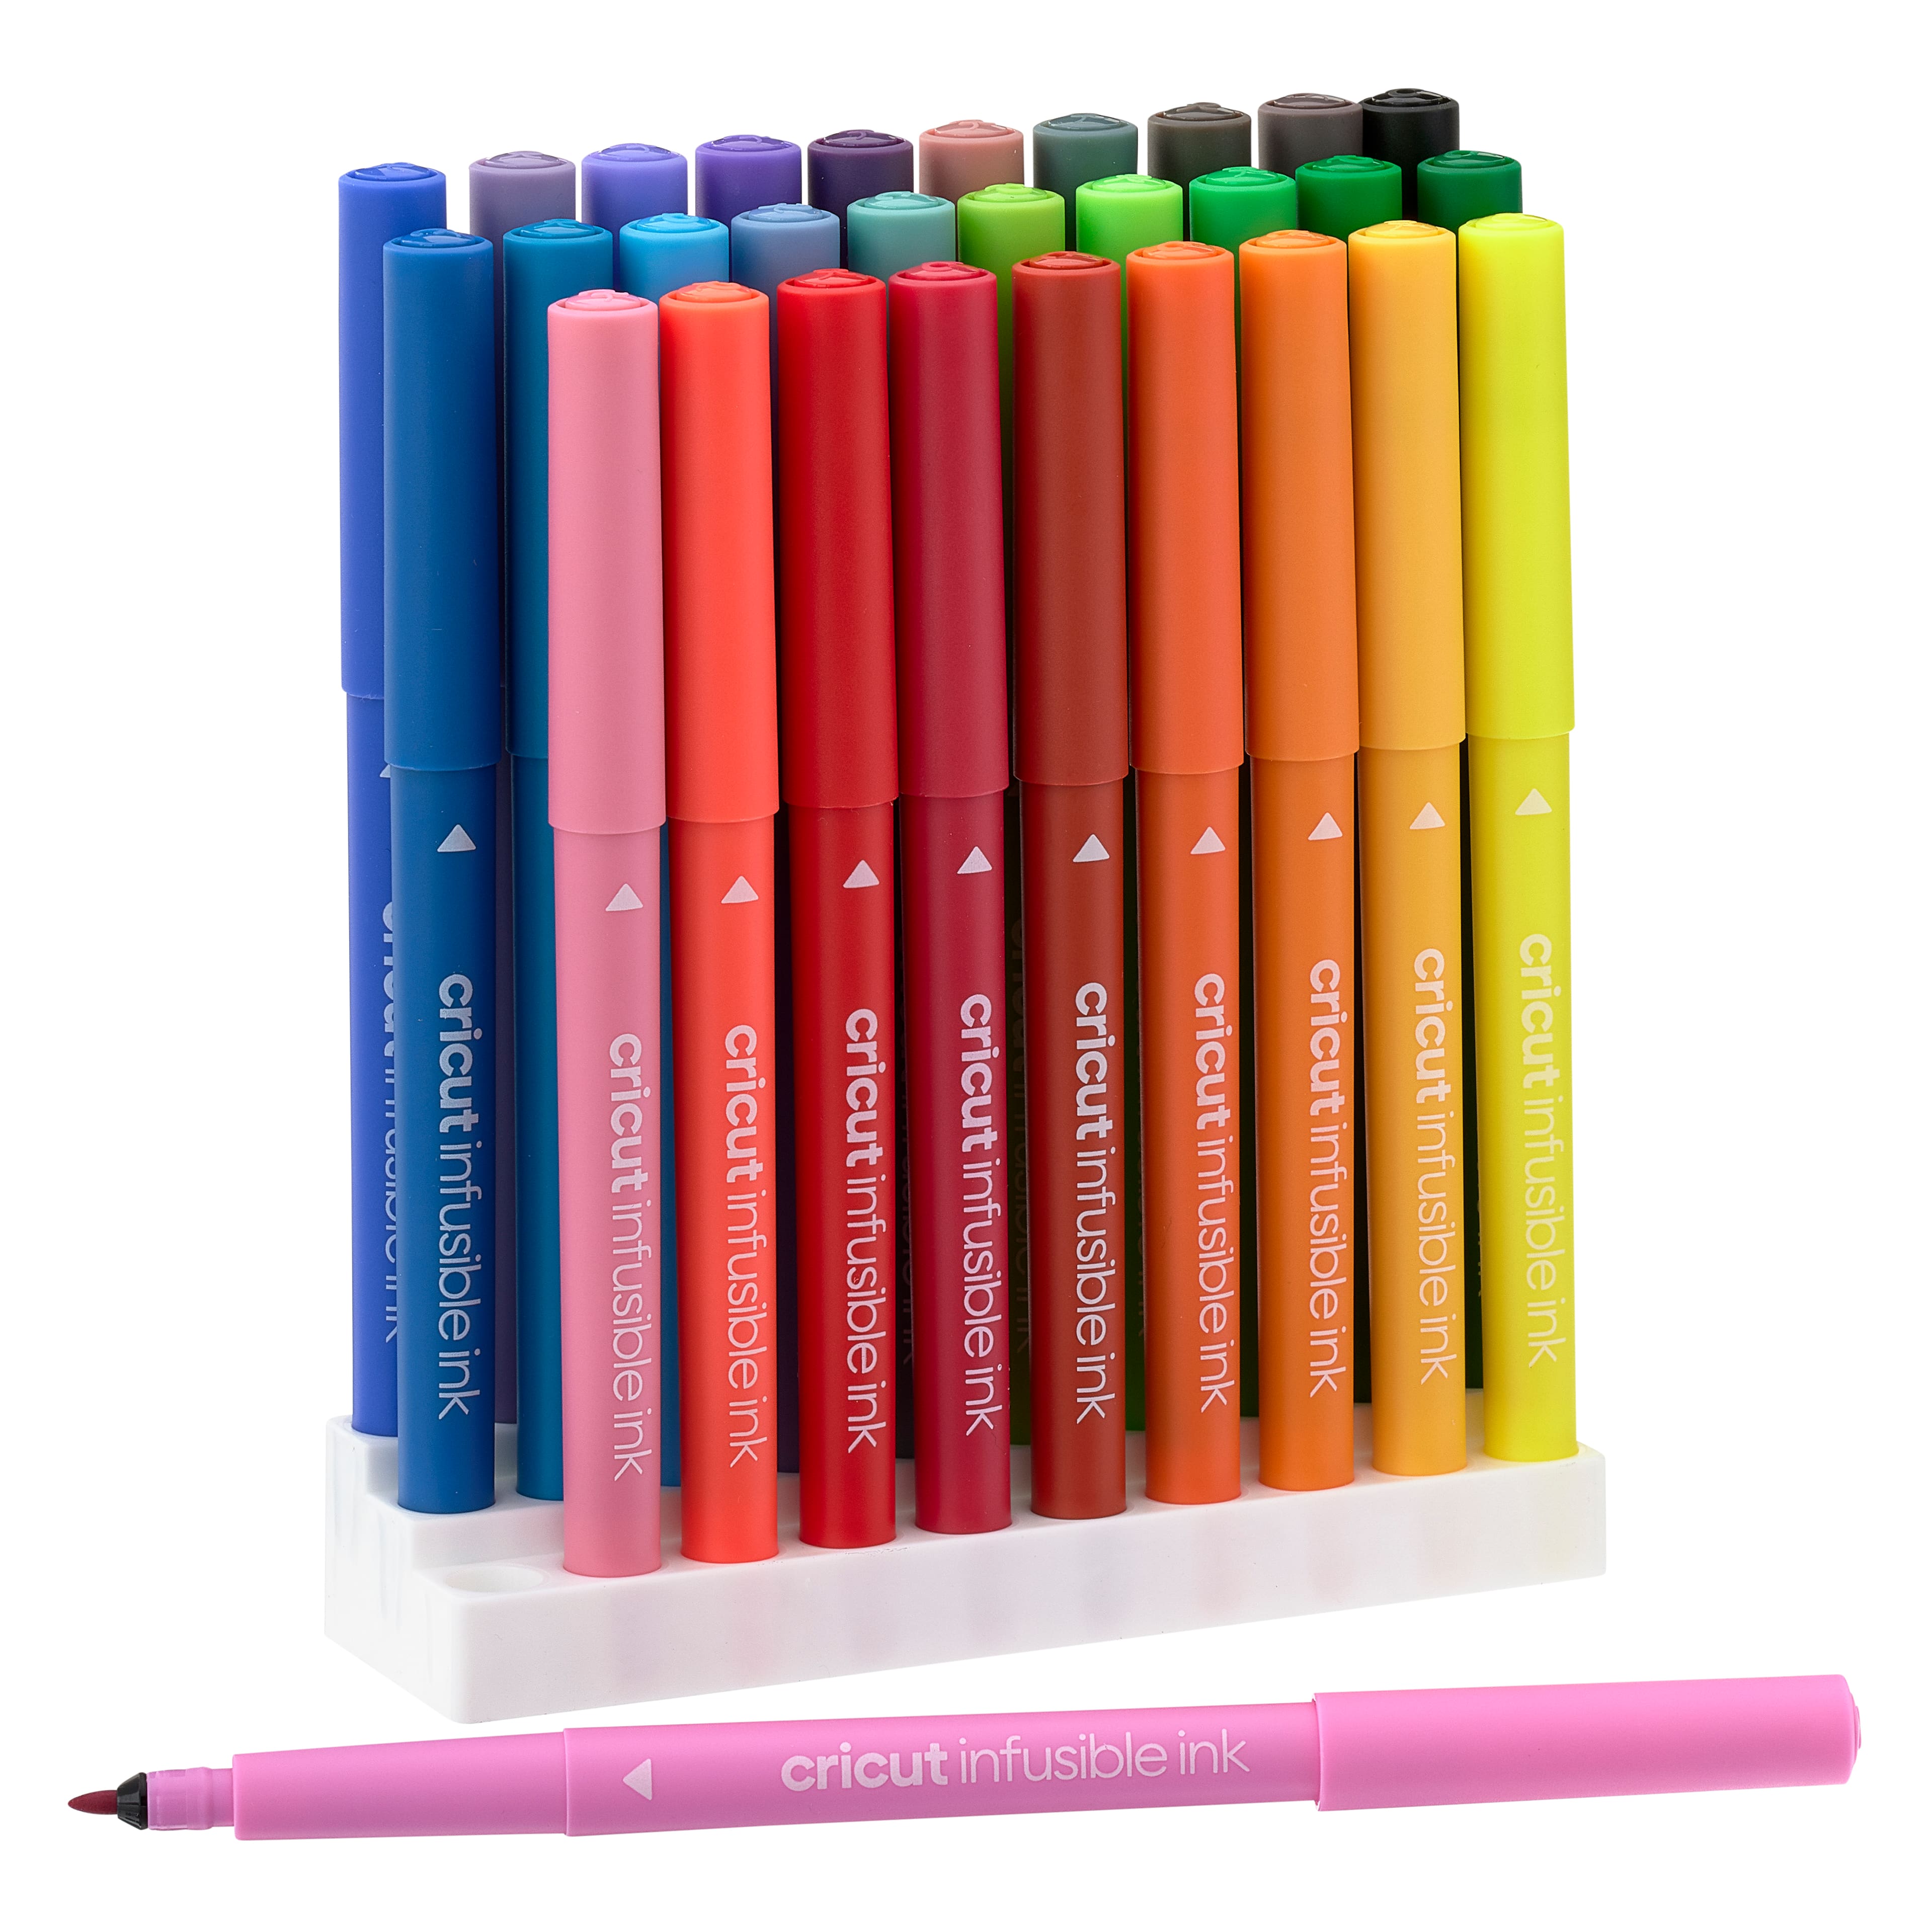 6 Packs: 30 ct. (180 total) Cricut® Infusible Ink™ Ultimate Marker